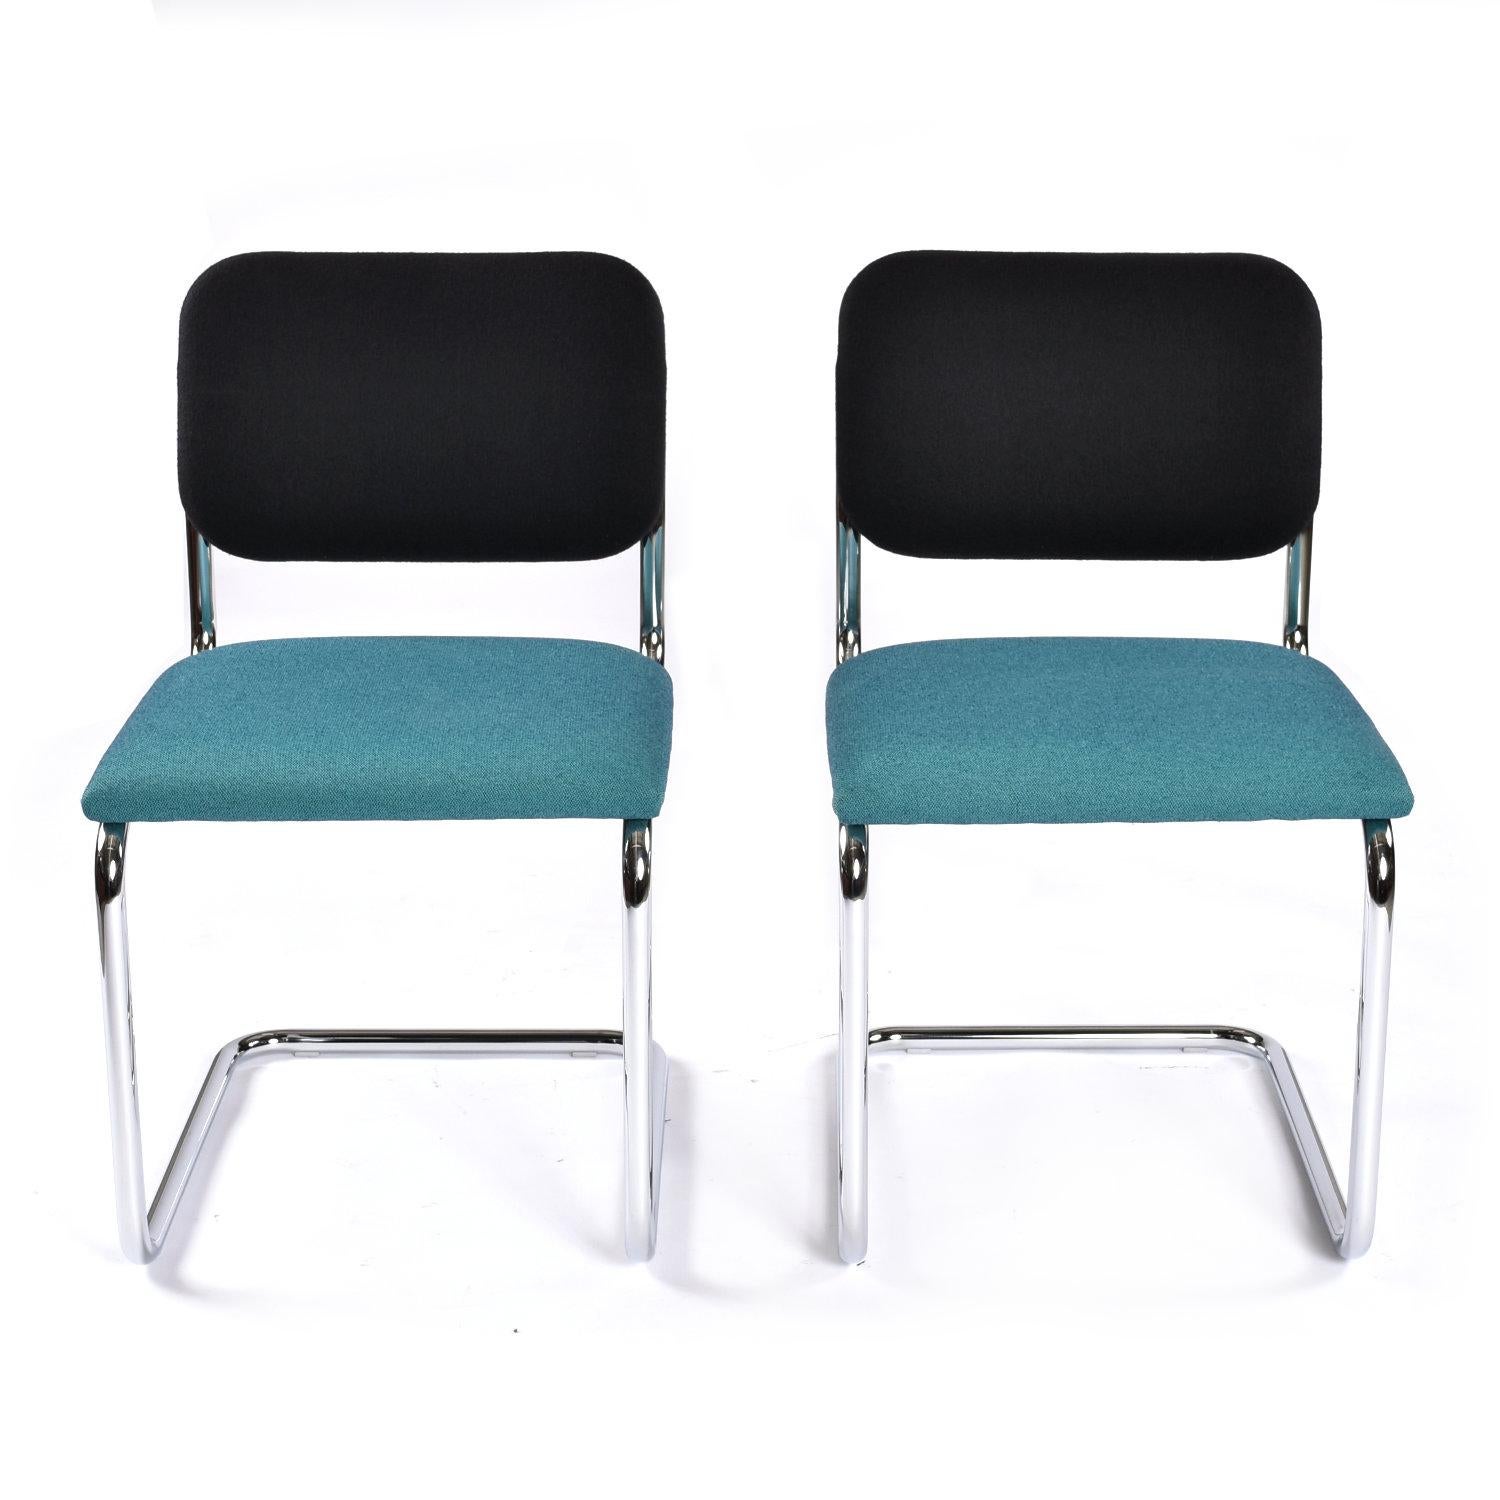 Fabric 5 Marcel Breuer for Knoll Blue and Black Upholstered Cesca Chairs